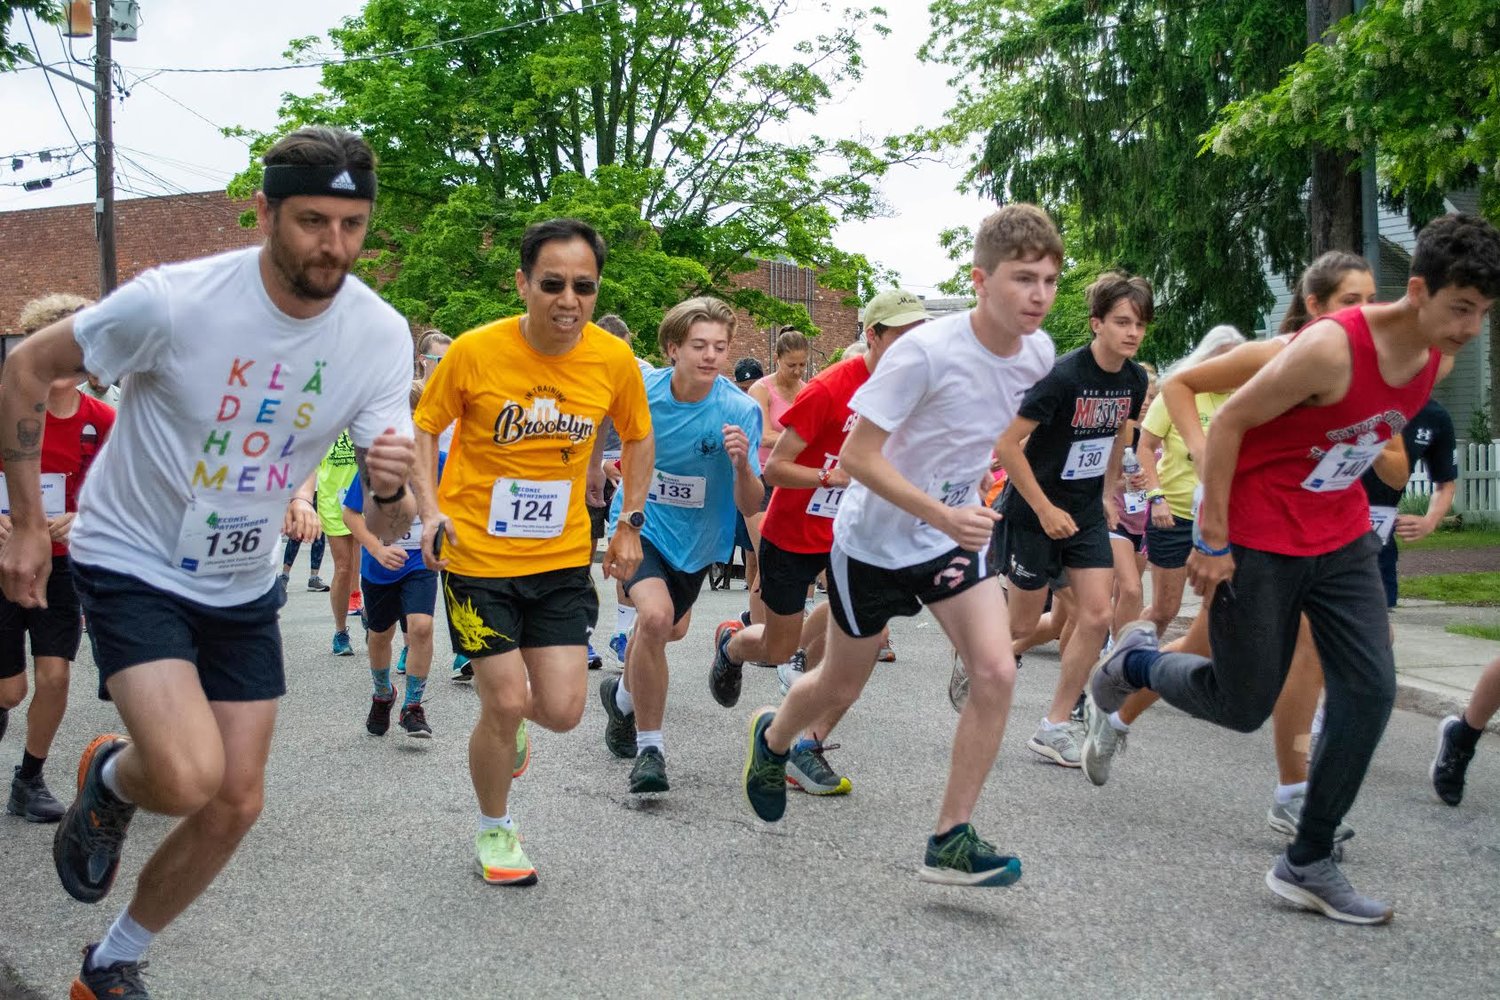 Runners lined up at Neville Park for the Moriches Community Center’s Anthony Parlato Memorial 5K Run/Walk on June 4.